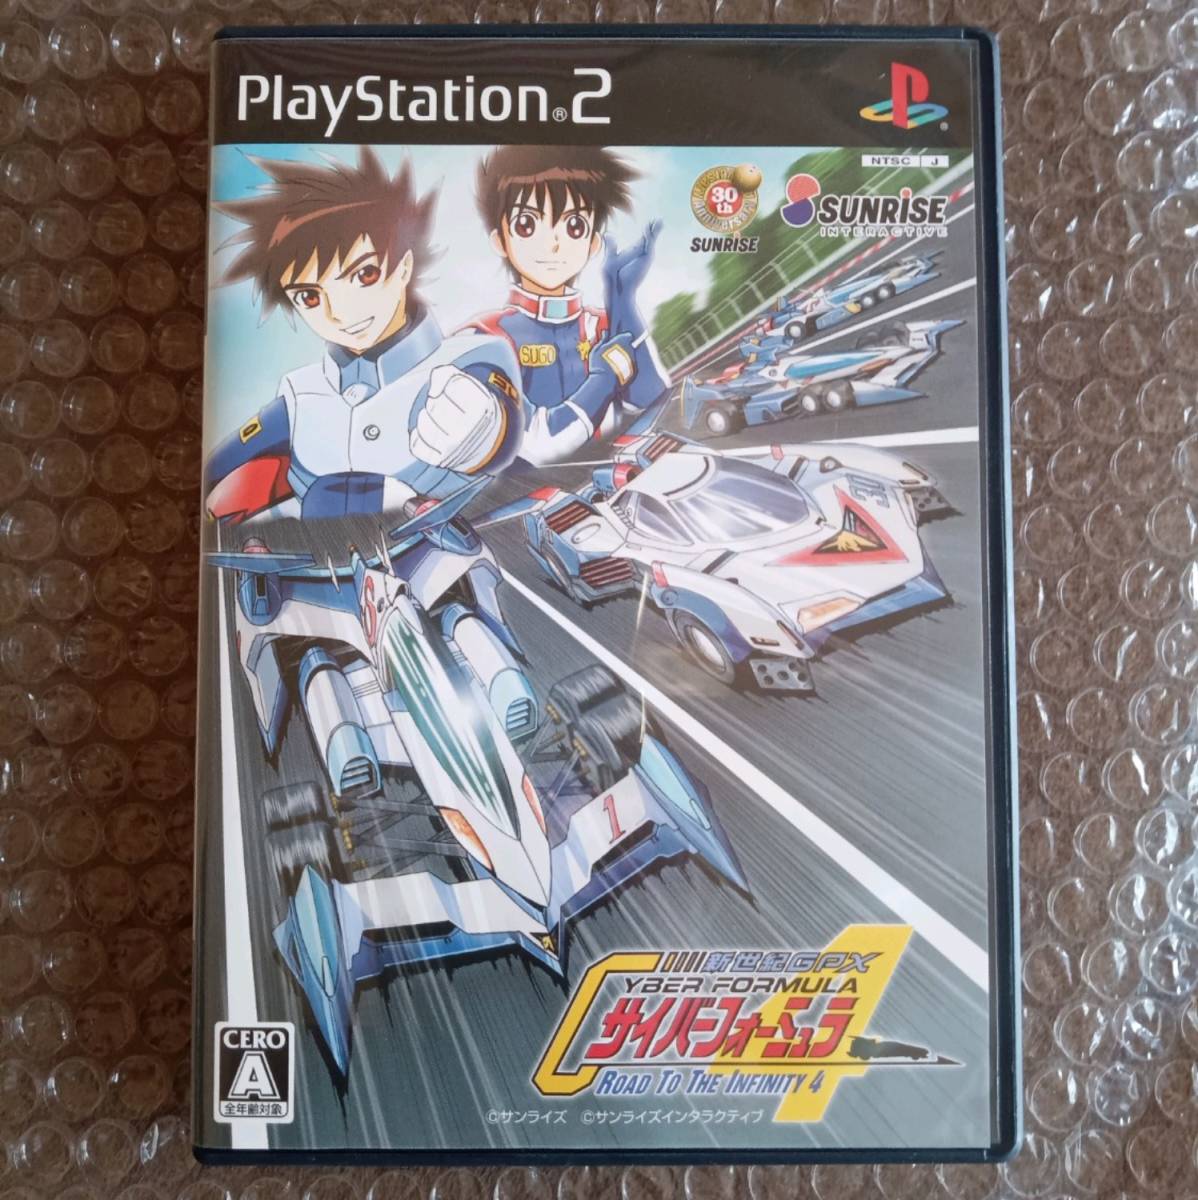 ☆PS2・新世紀GPXサイバーフォーミュラ・Road To The INFINITY 4・中古品☆_画像1